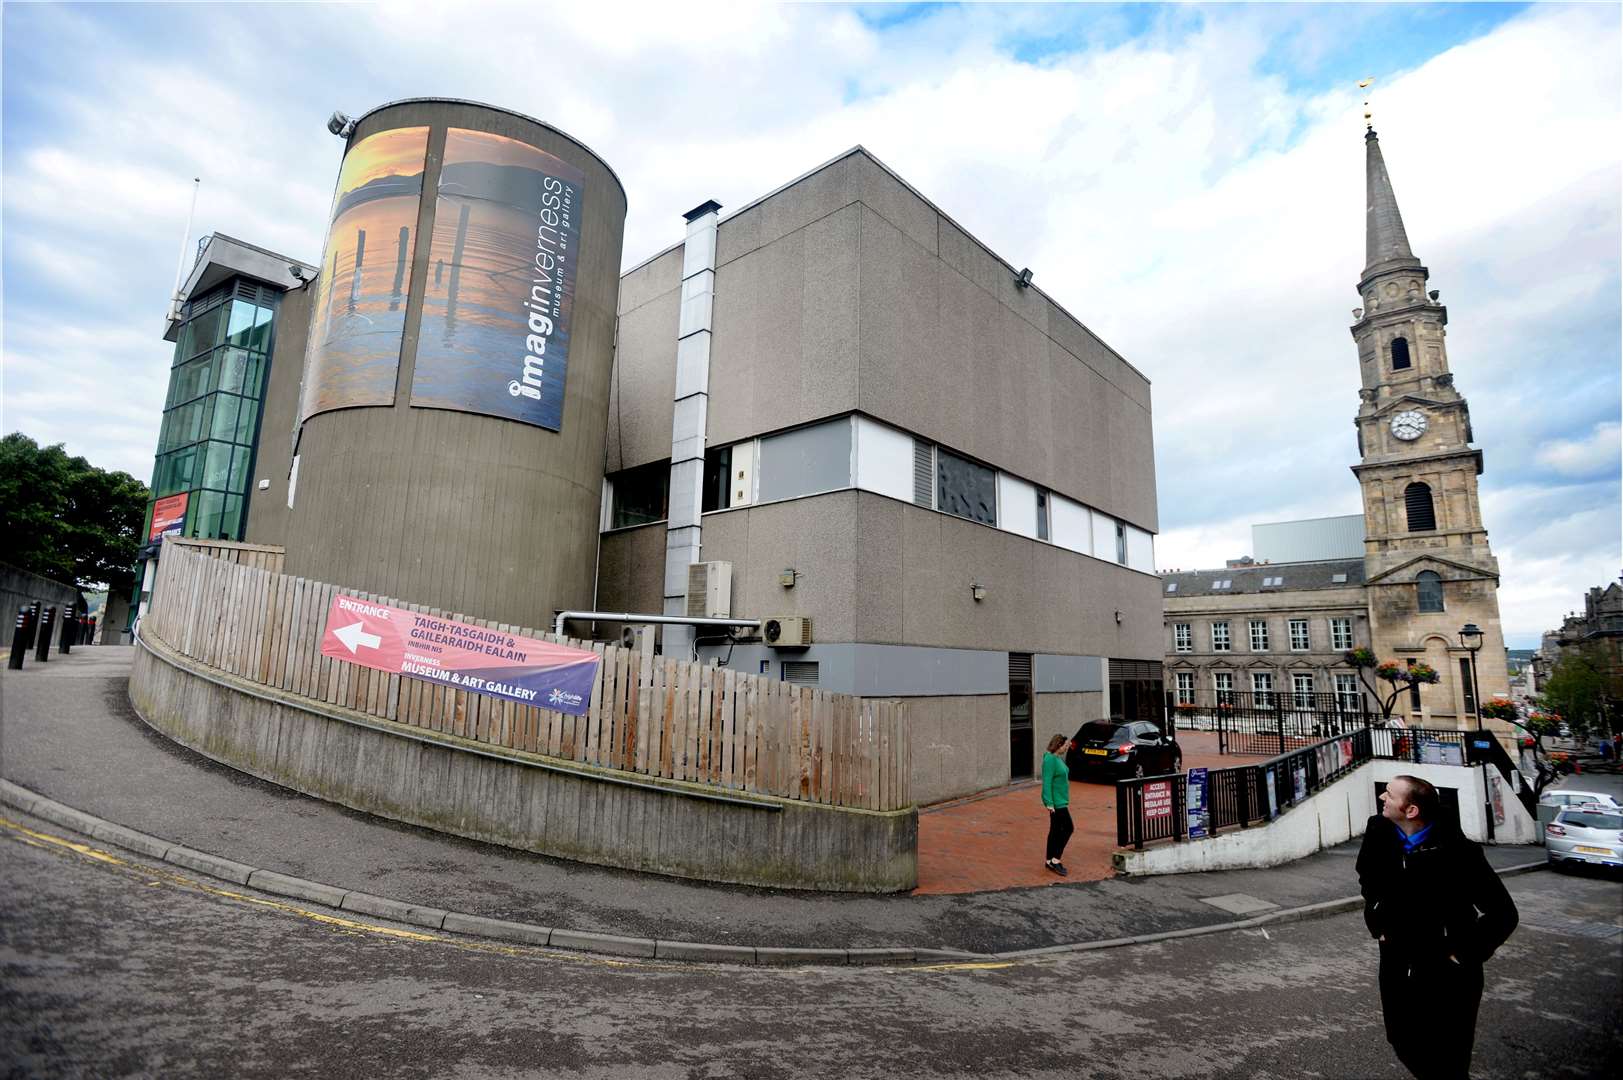 Inverness Museum and Art Gallery has reopened with a number of restrictions in place for safety.